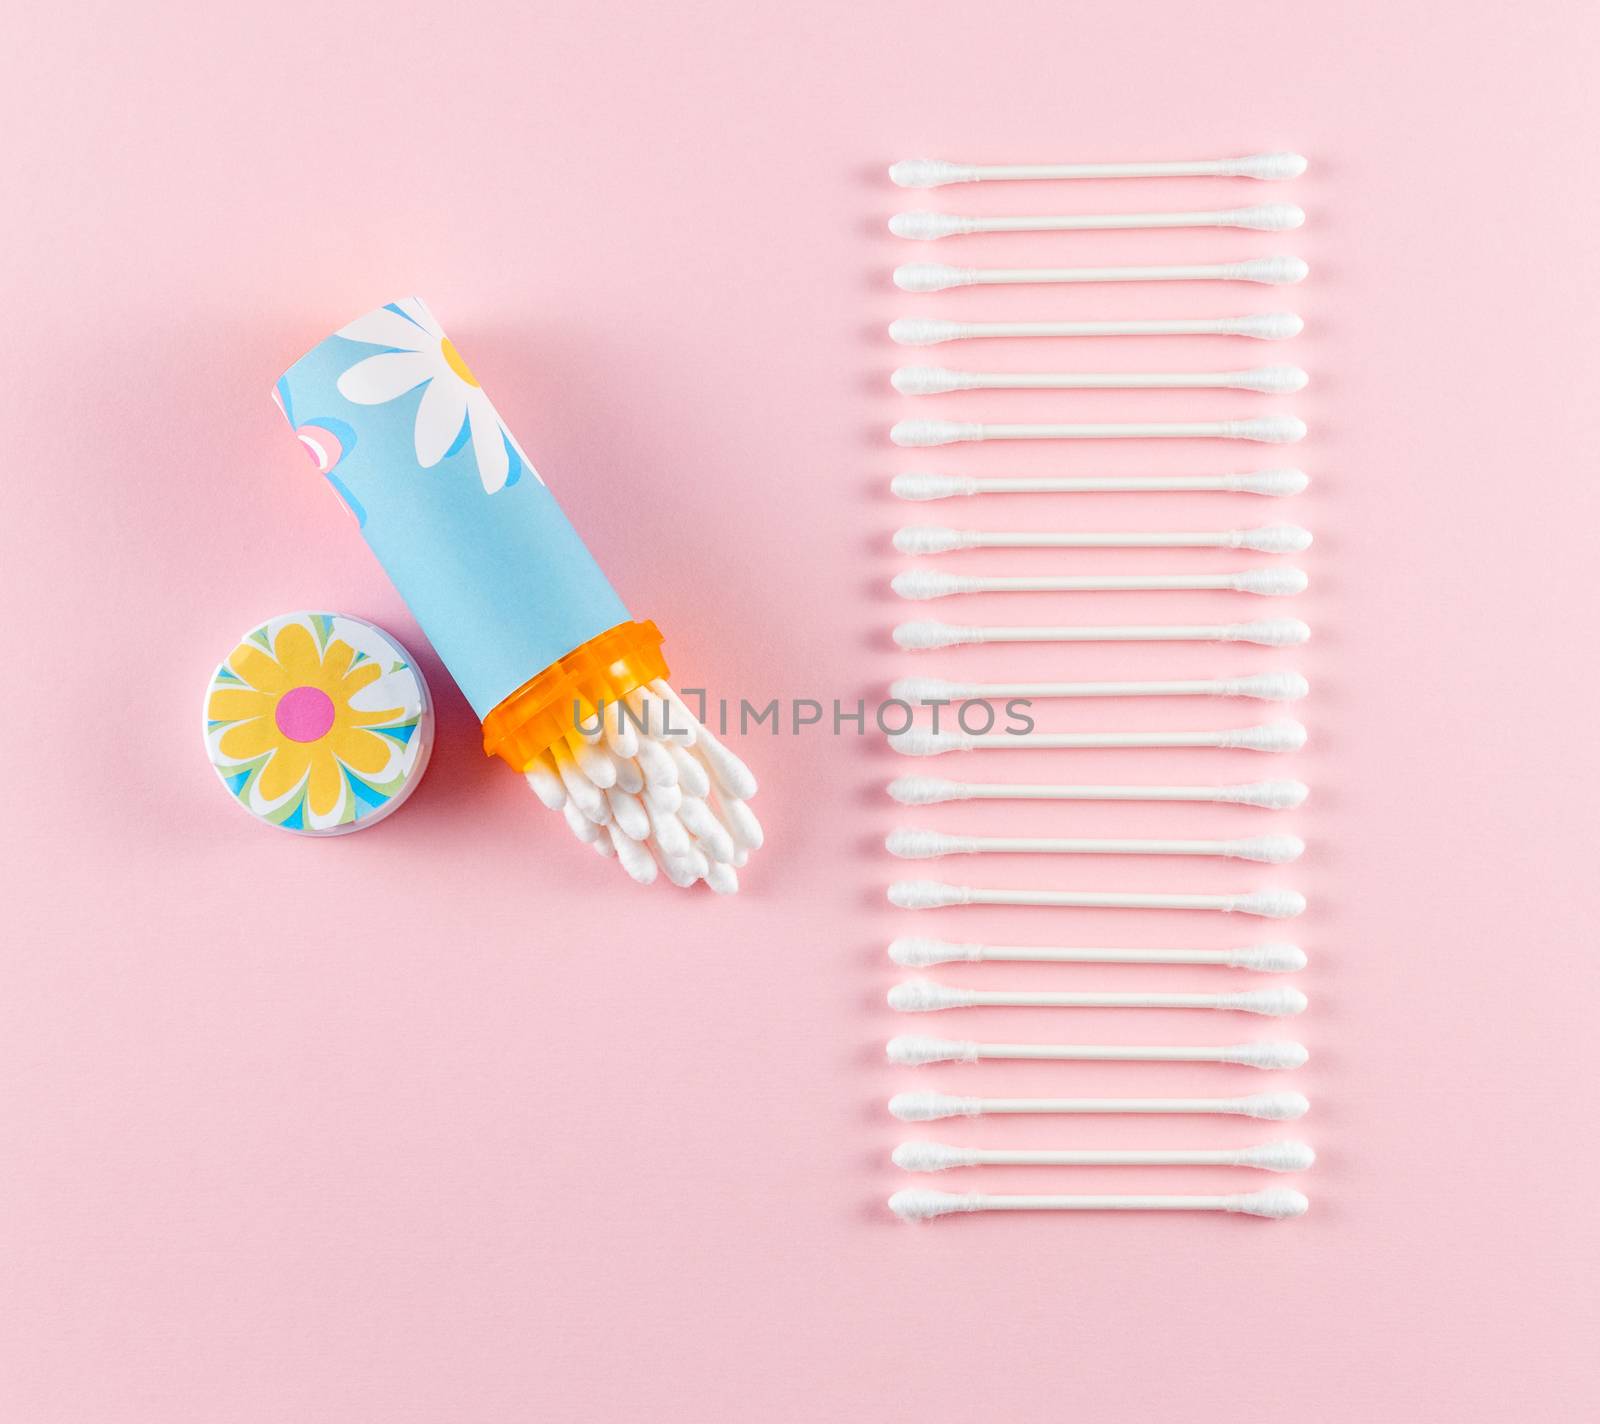 Travel cotton swab holder made from repurposed prescription bottle, on pink background